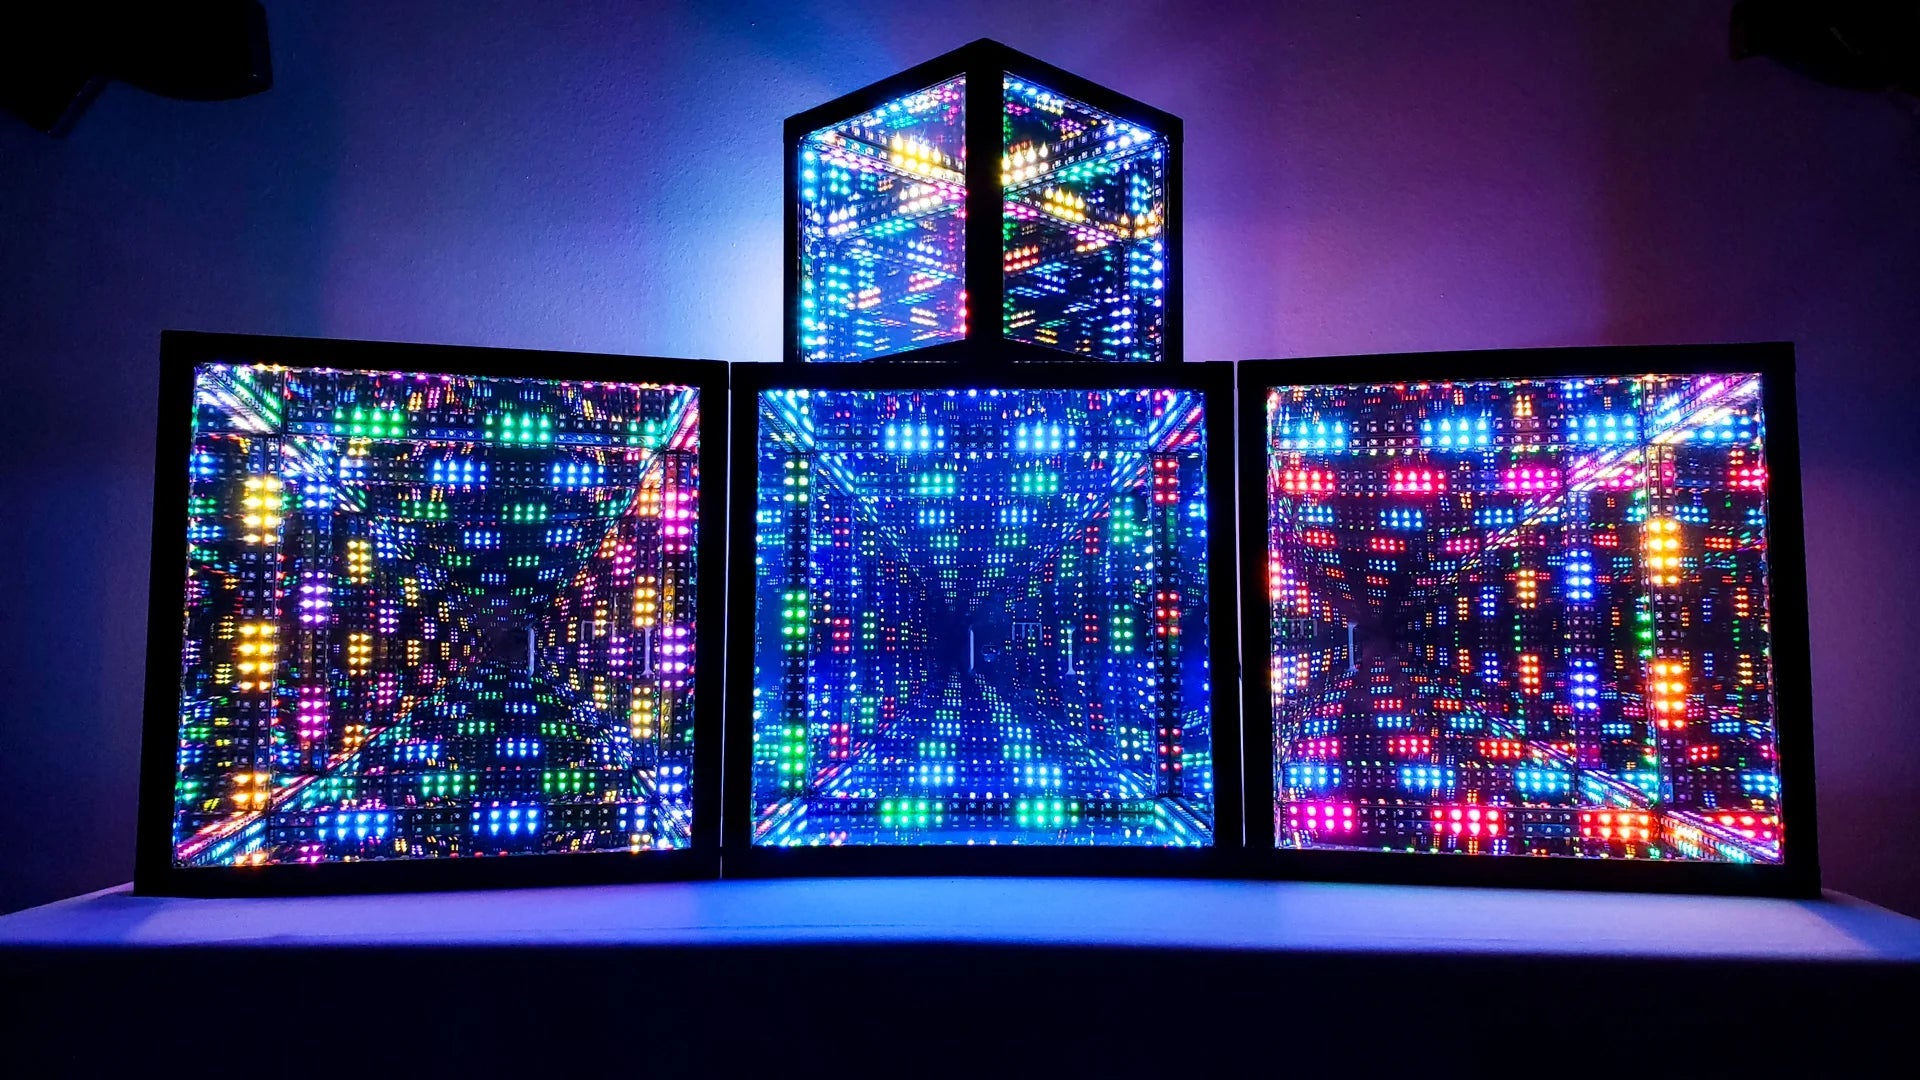 3 HyperCubes lined up together, with one stacked on top, creating an LED art installation